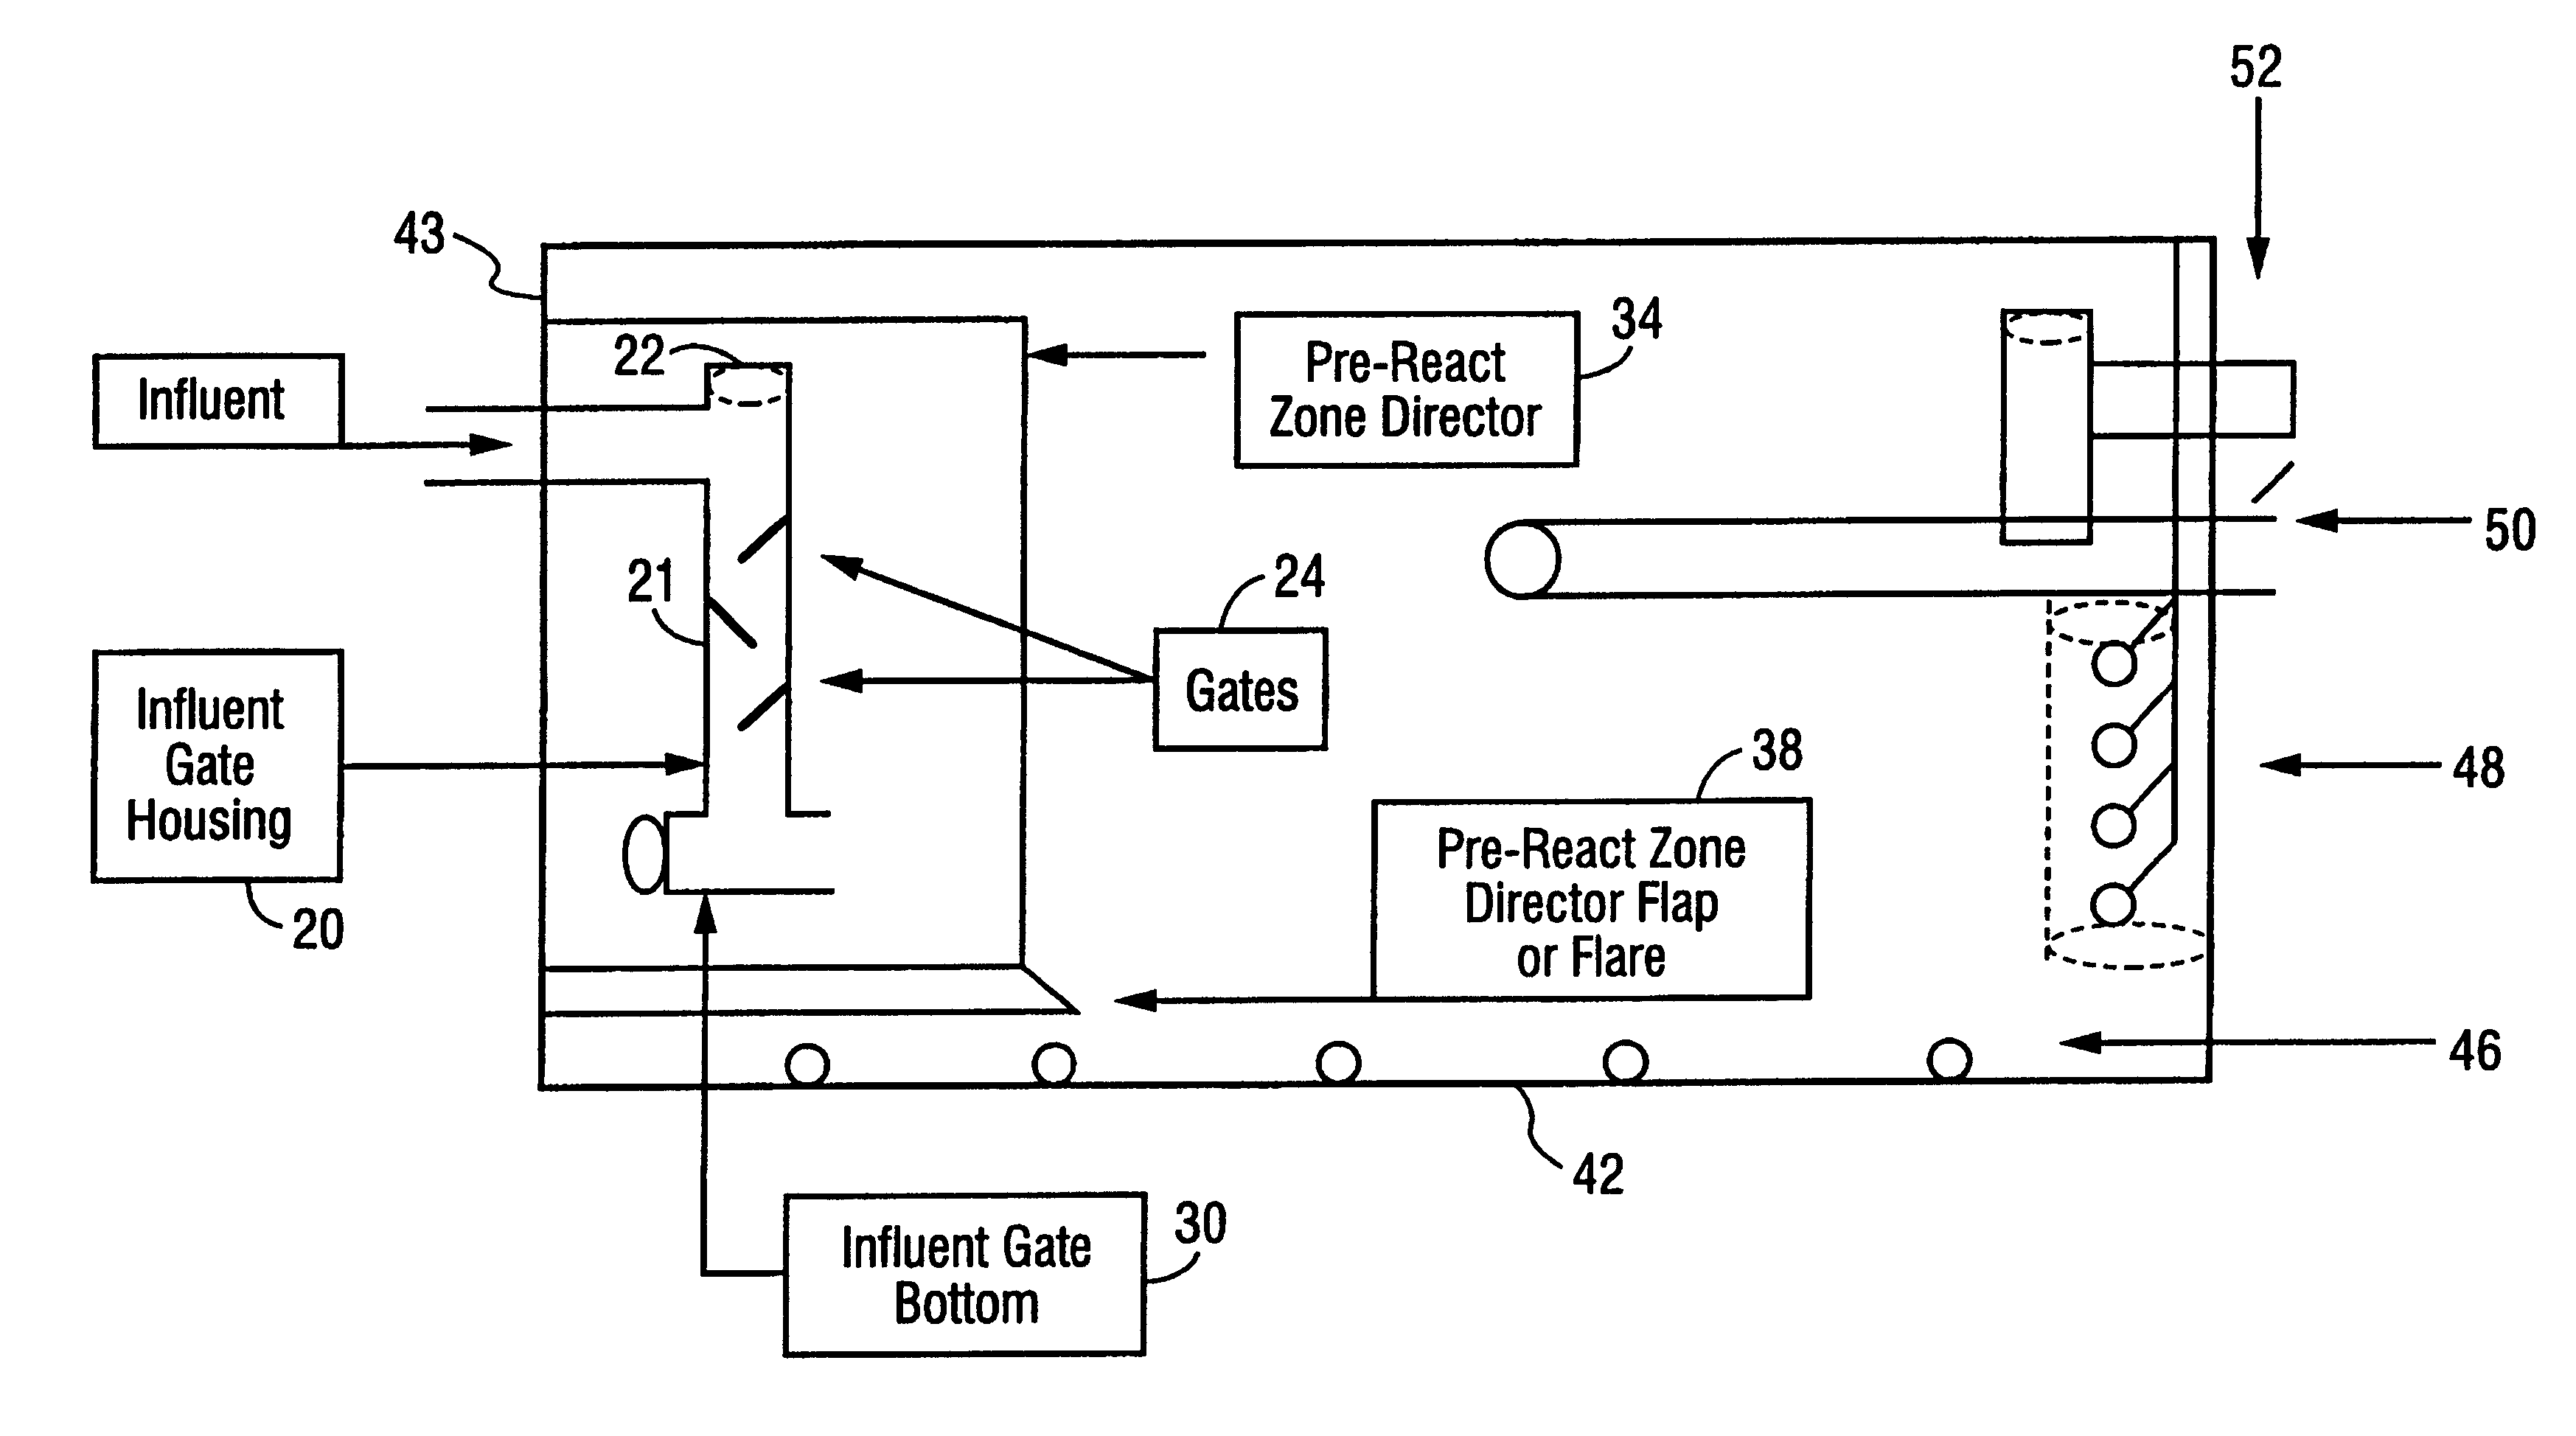 Wastewater treatment tank with influent gates and pre-react zone with an outwardly flared lower portion